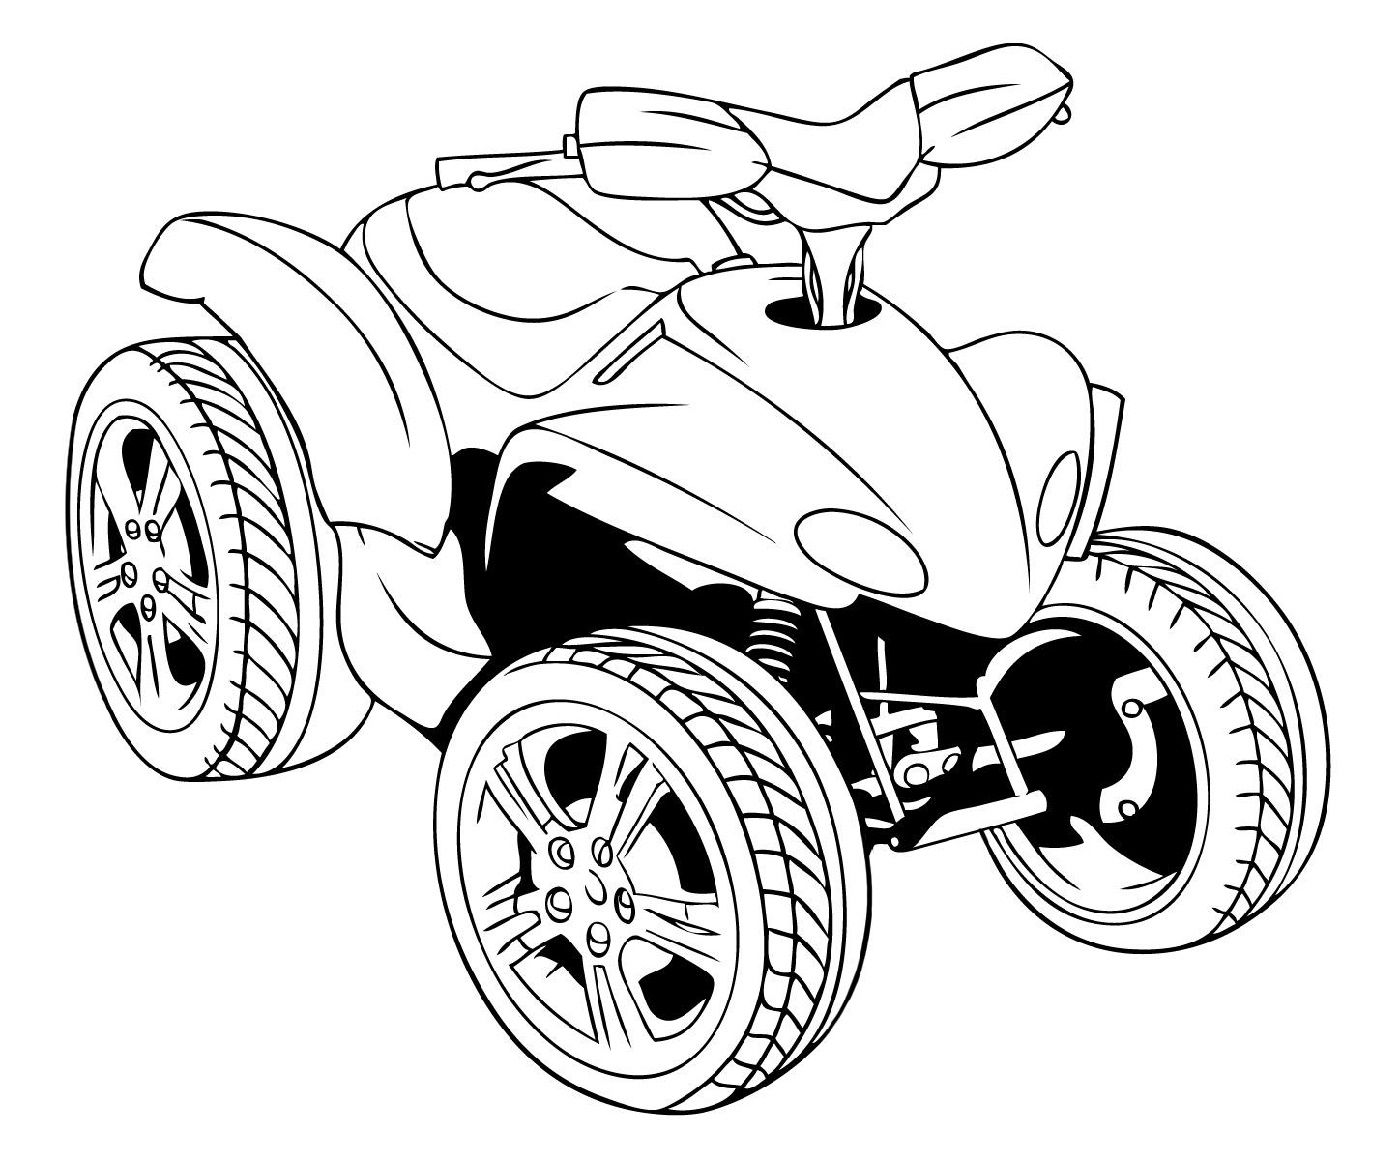 Four wheeler coloring pages k worksheets coloring pages coloring pages to print truck coloring pages